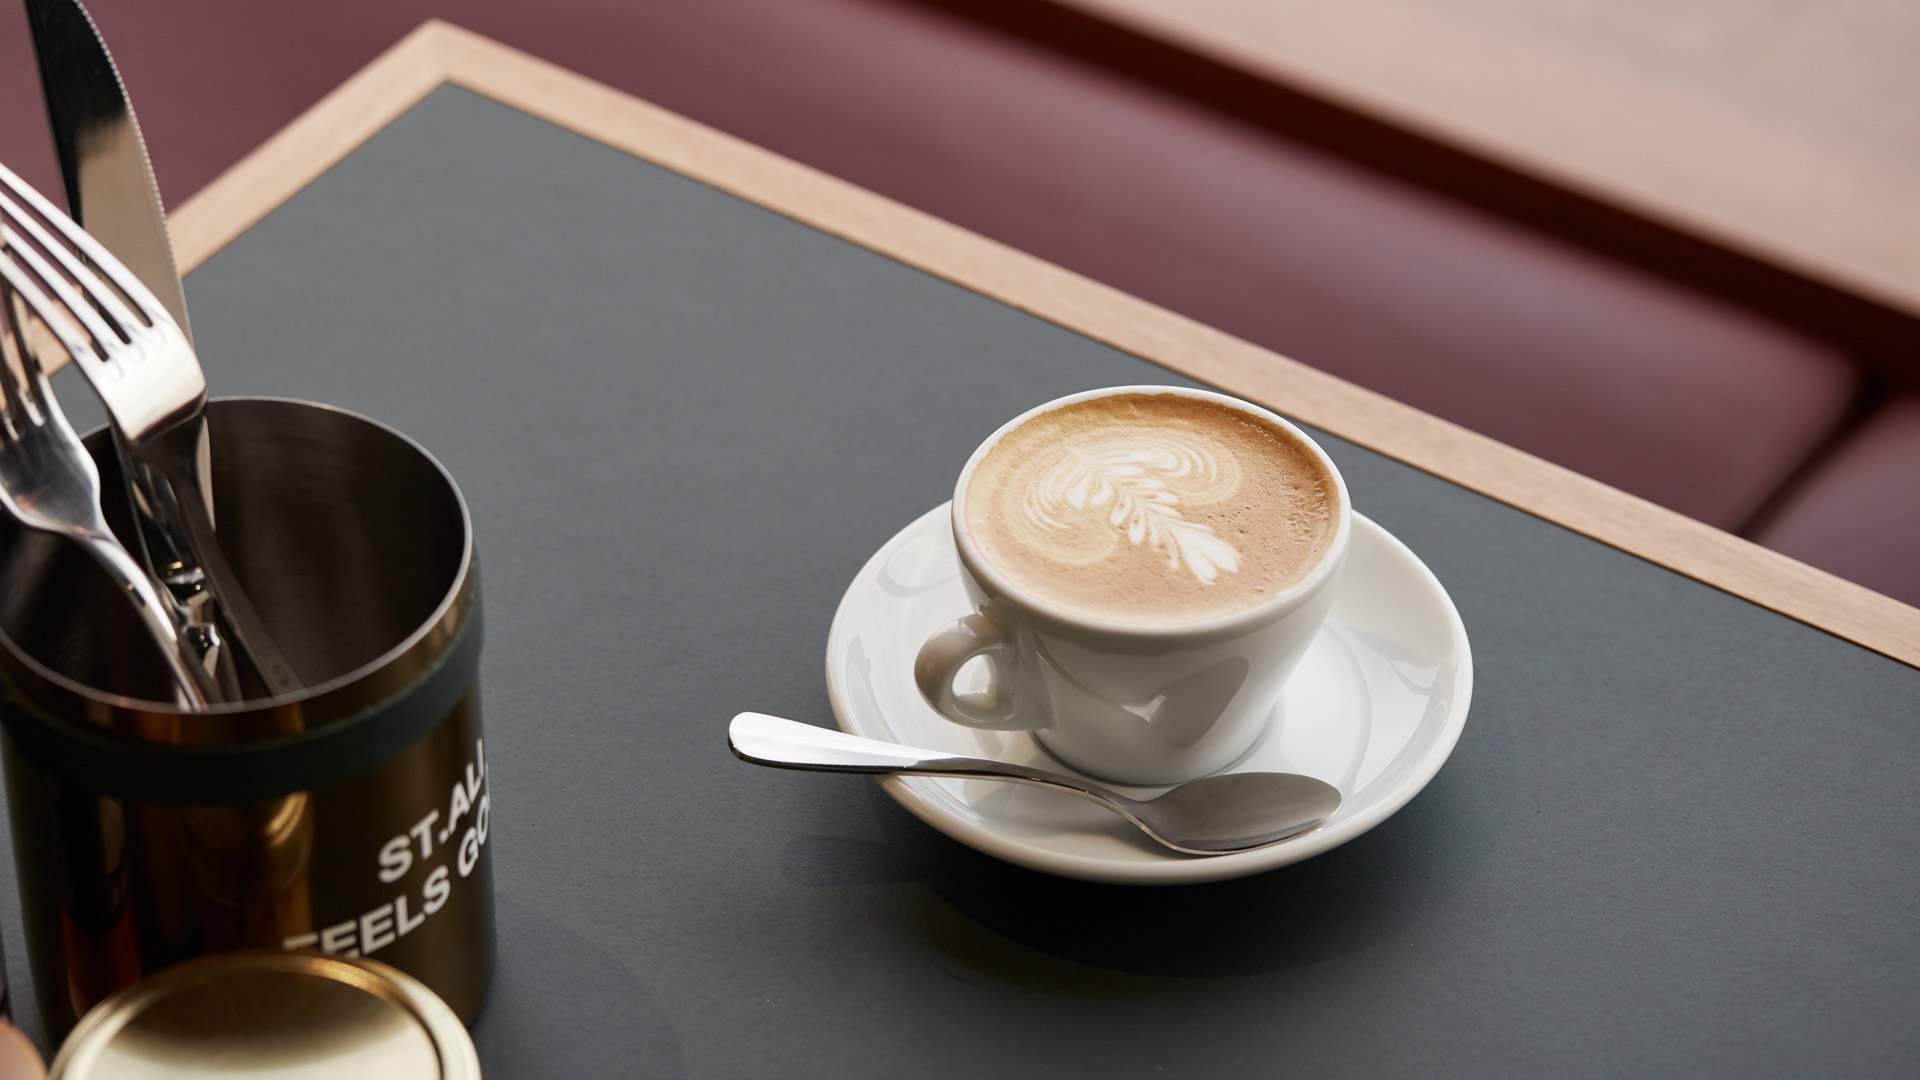 St Ali Has Landed at the Airport So Now You Can Drink an Actually Good Coffee Before Your Flight